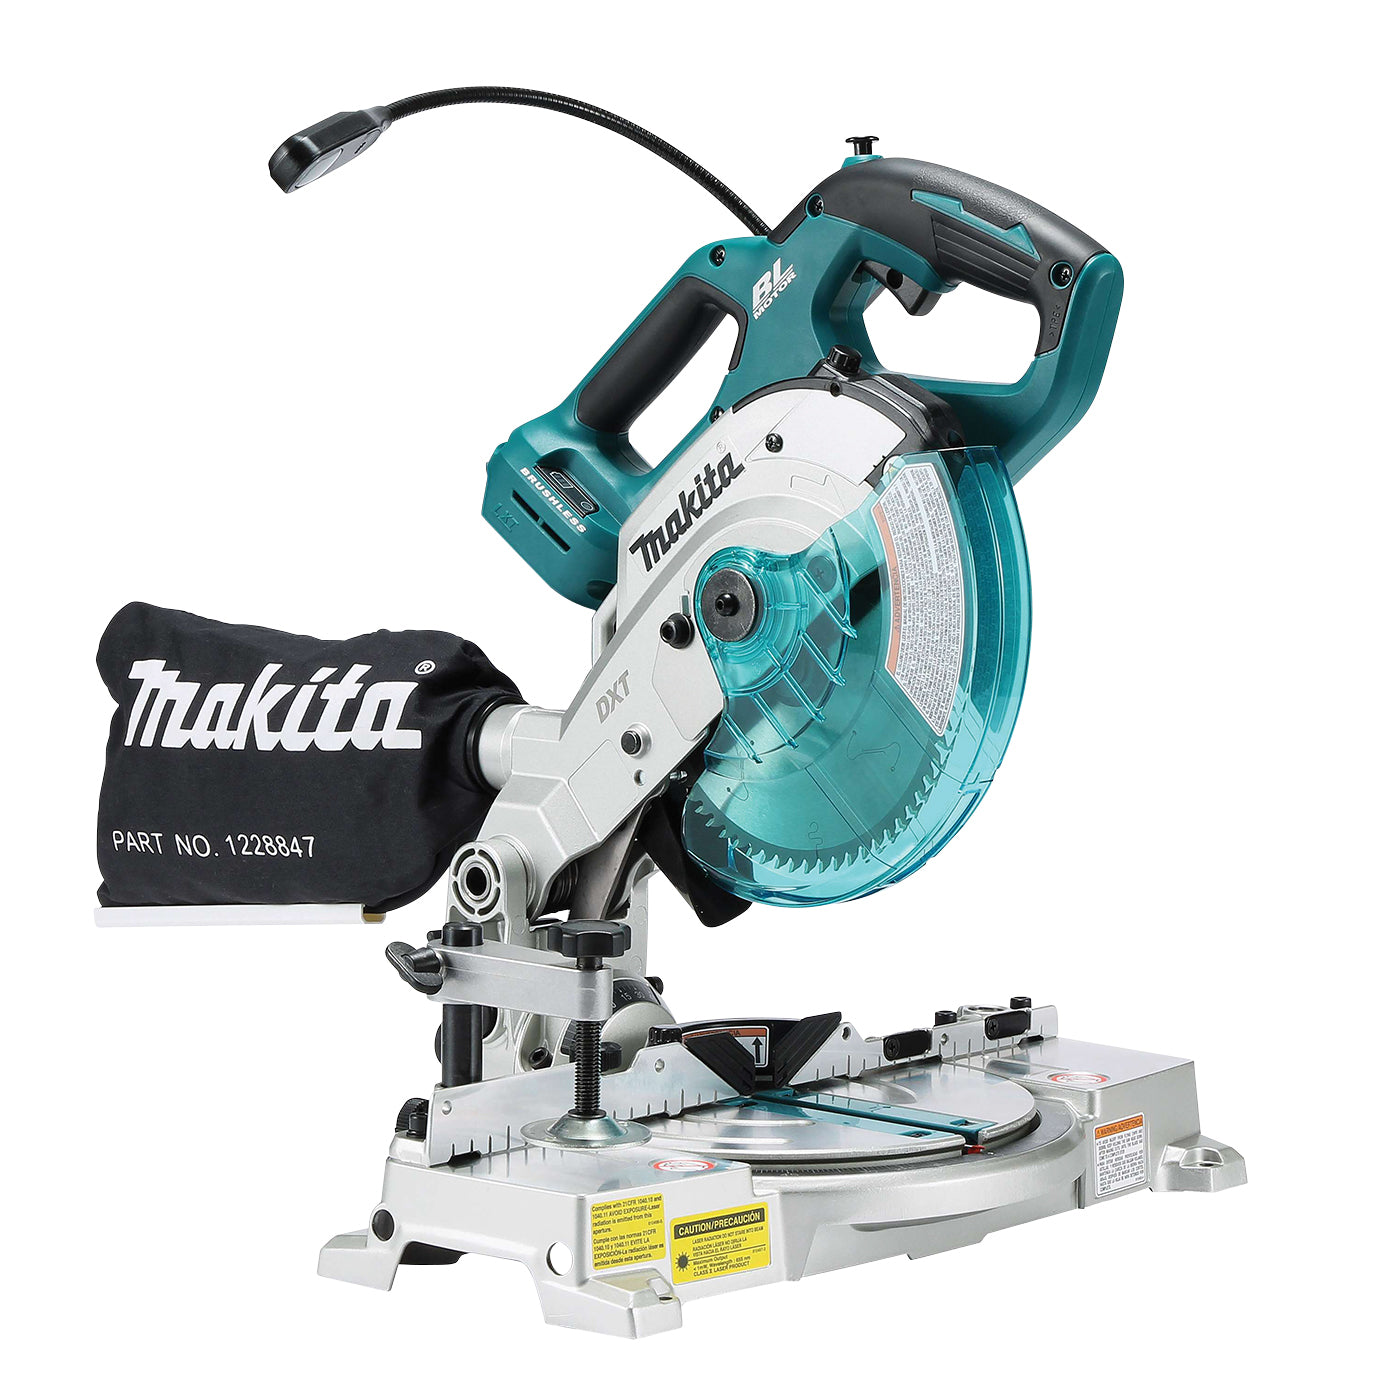 18V Brushless 165mm (6-1/2") Compact Mitre Saw Bare (Tool Only) DLS600Z by Makita